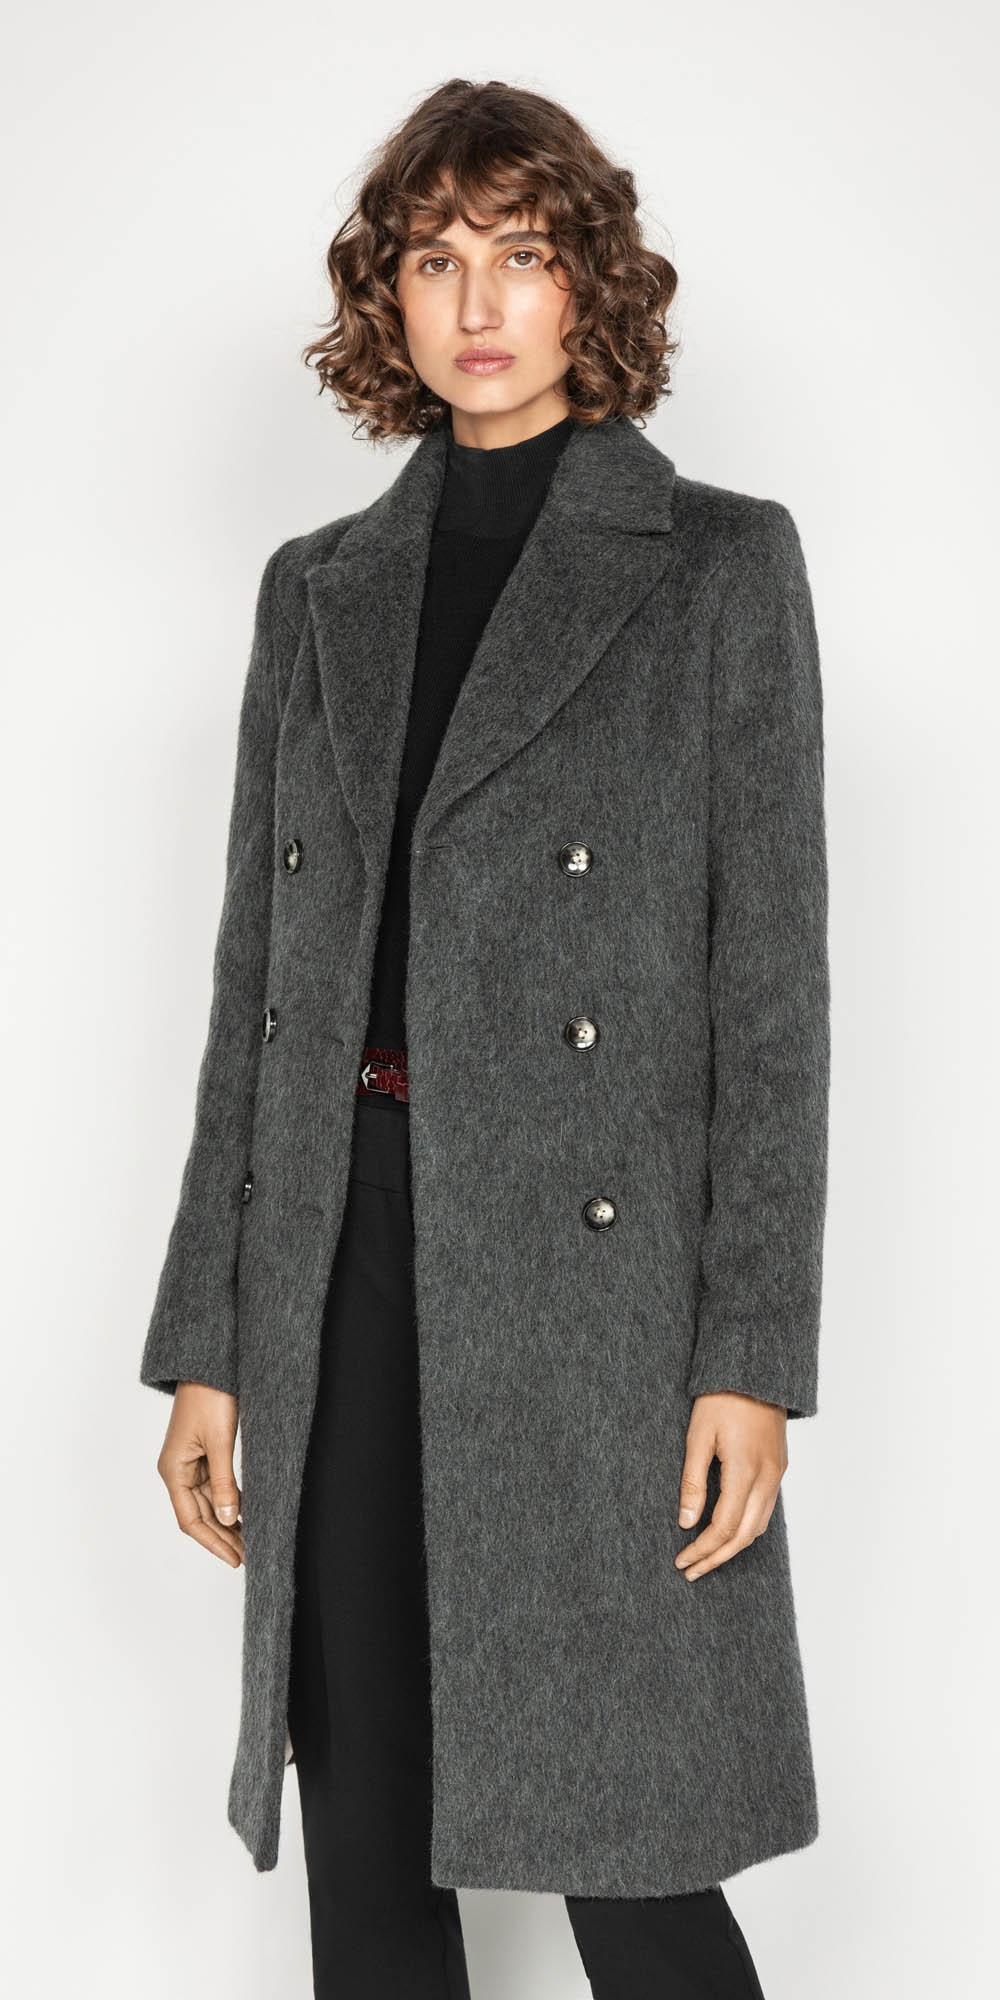 Charcoal Double Breasted Coat | Buy Coats Online - Cue